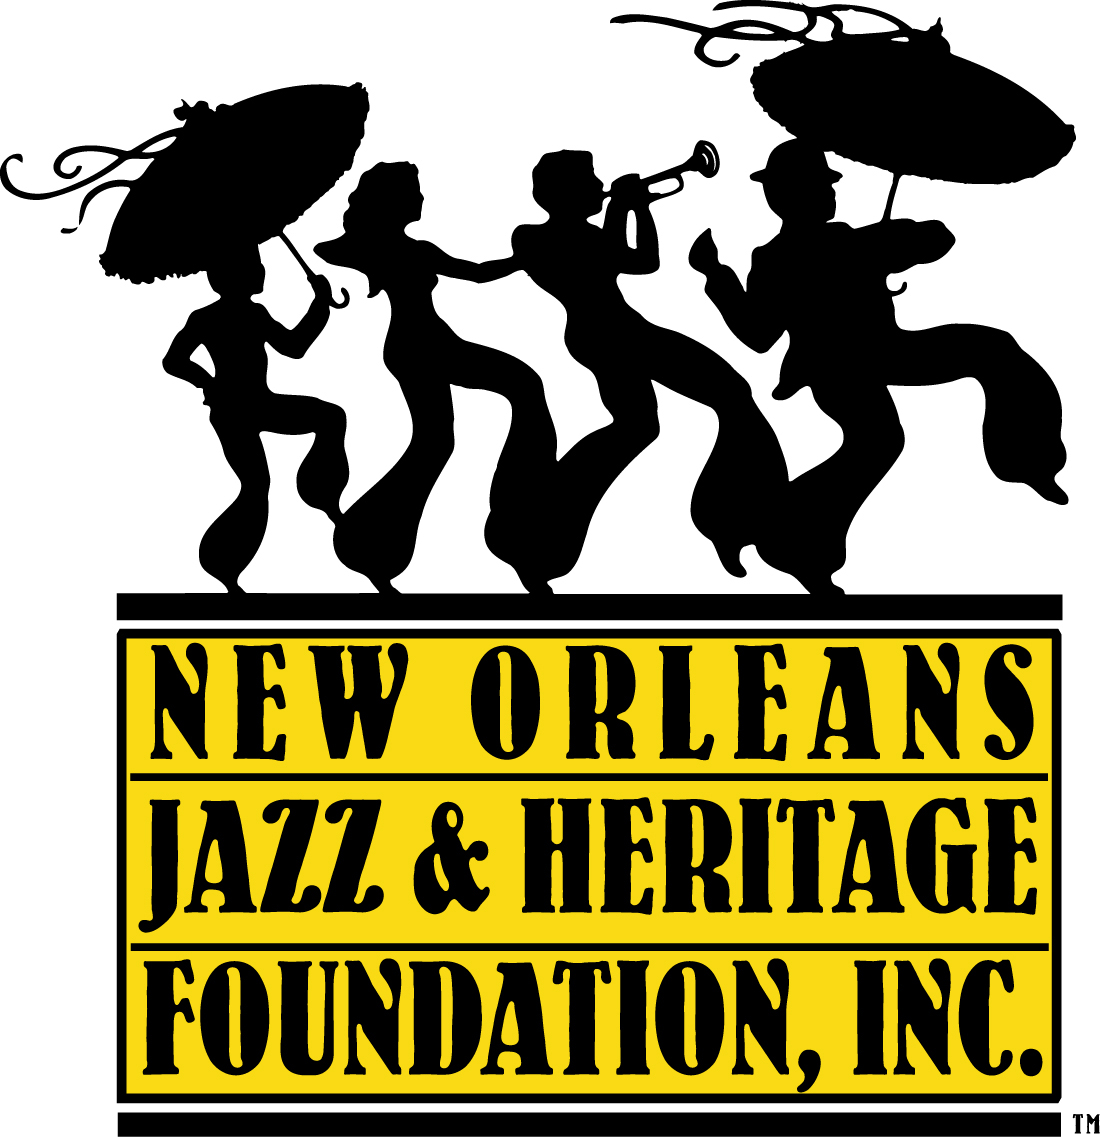 New Orleans Jazz & Heritage Festival and Foundation